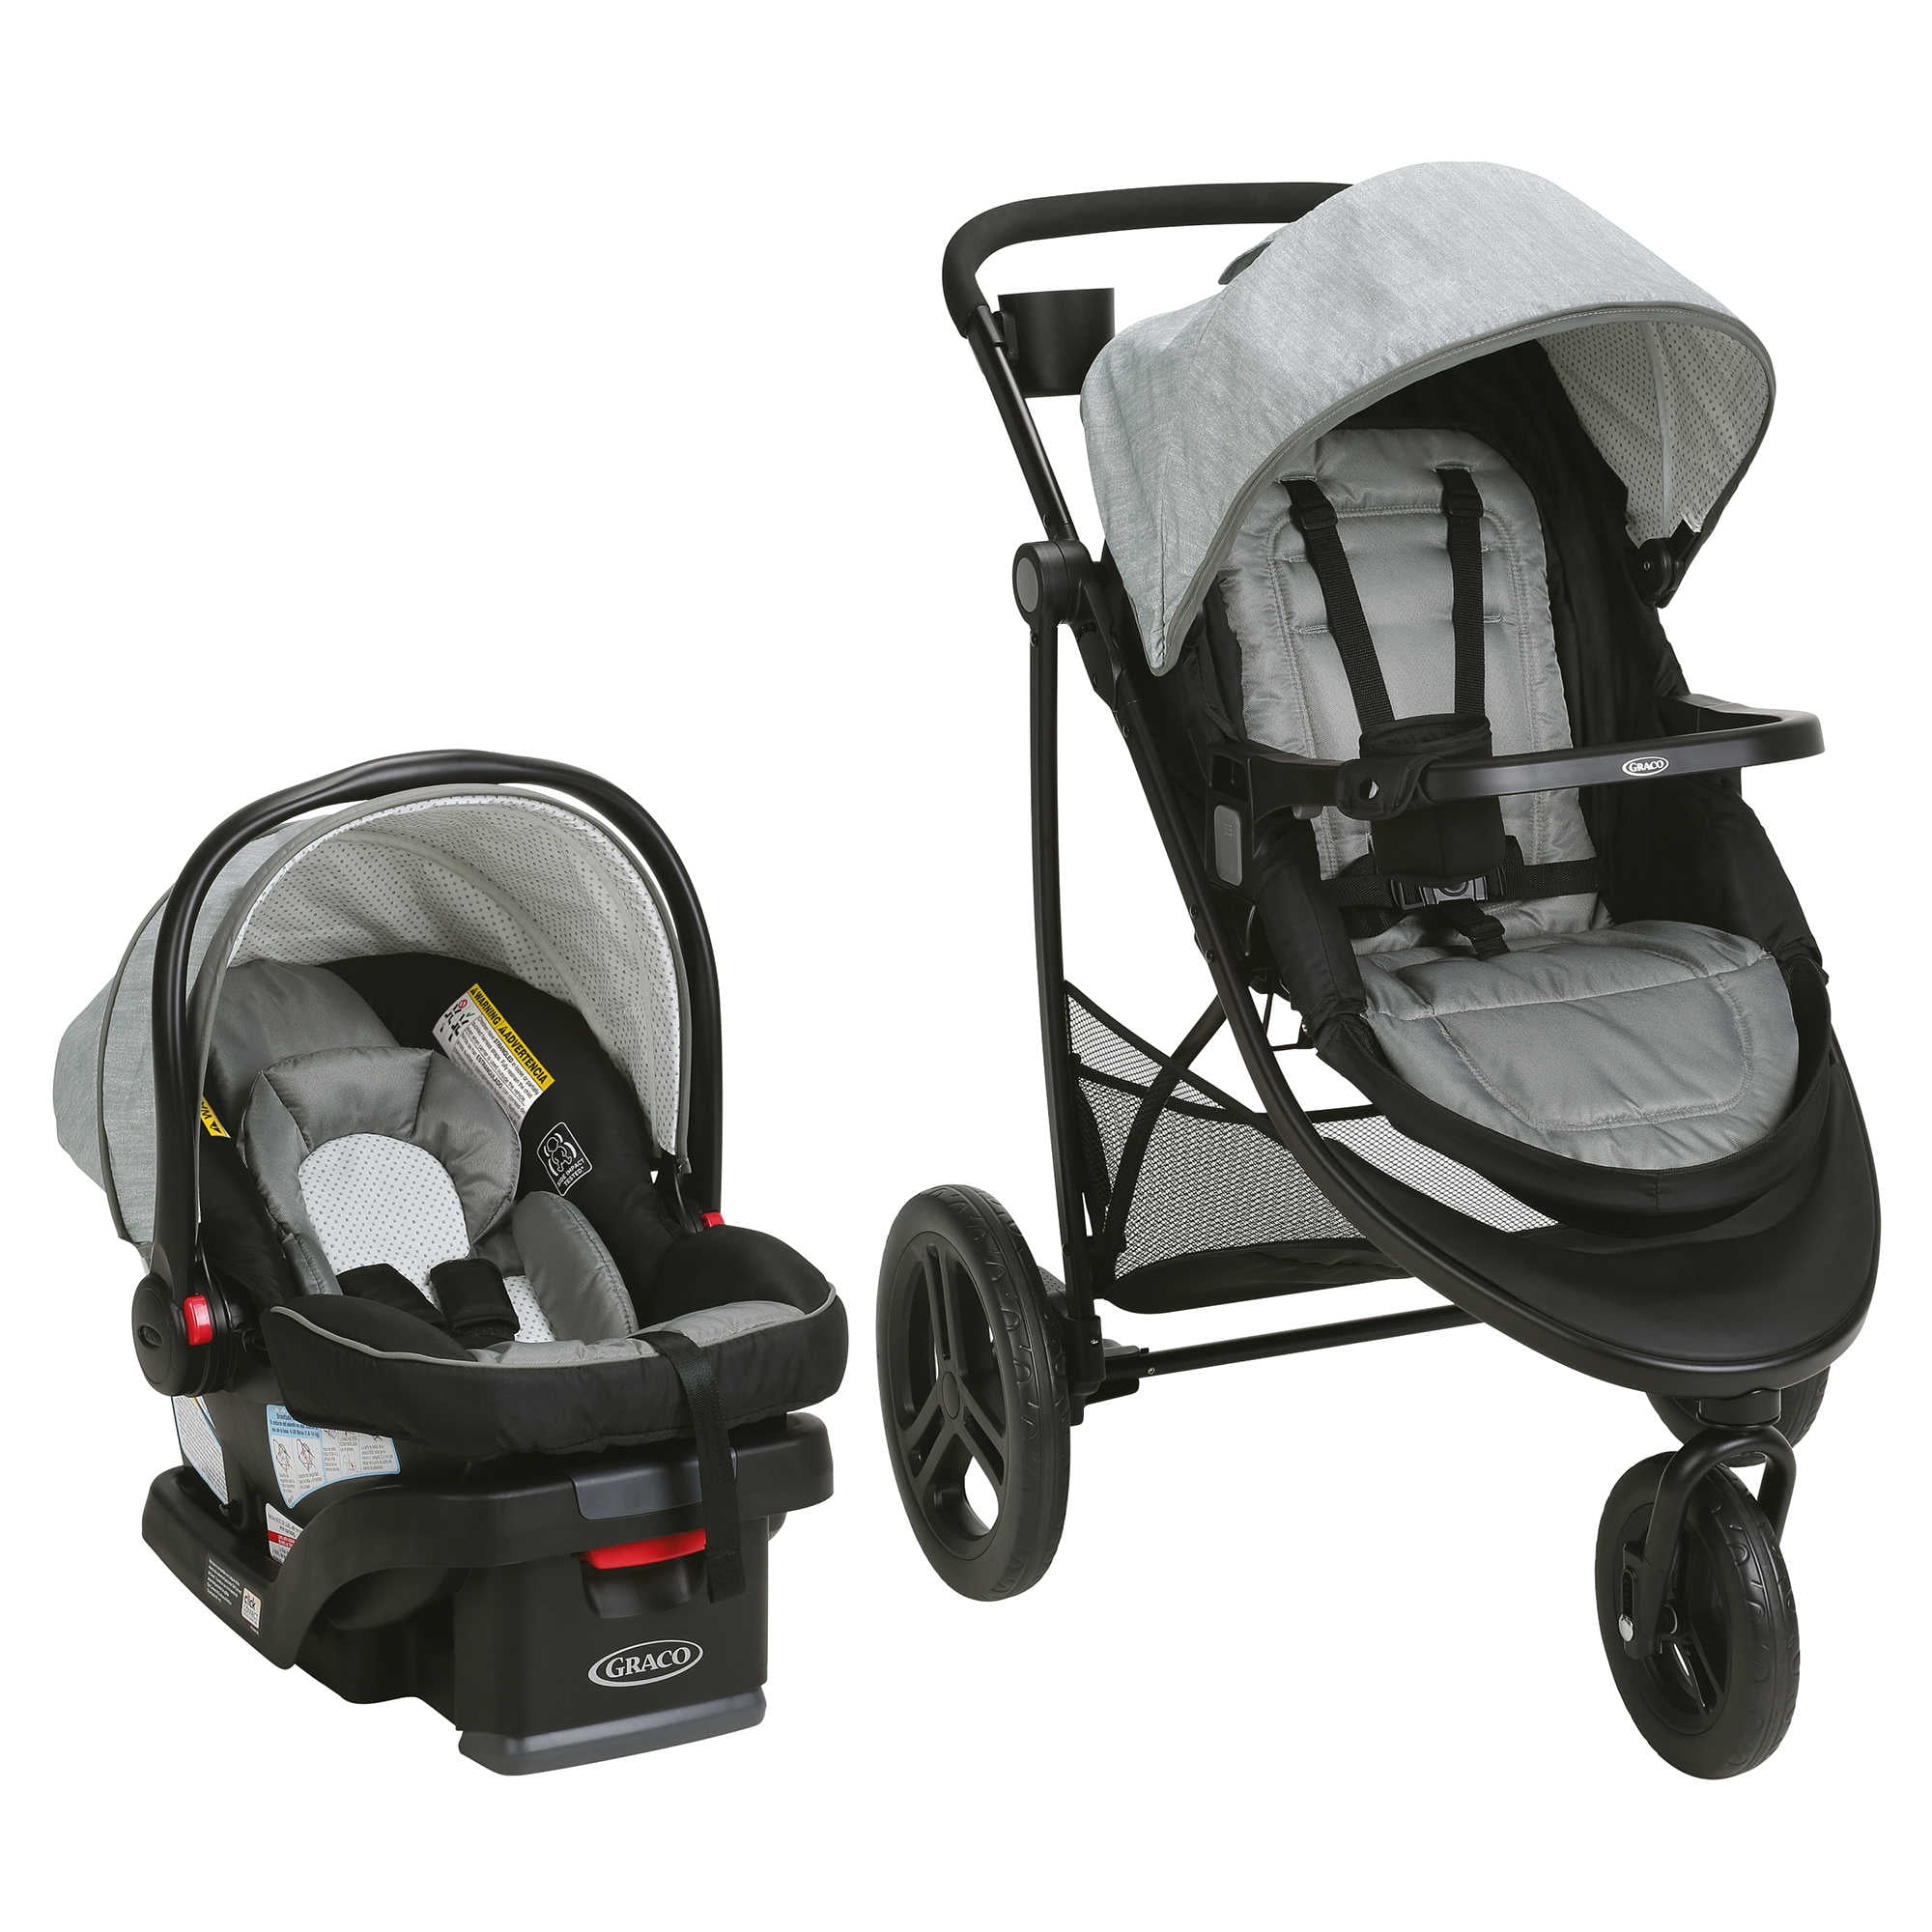 difference between graco modes and graco modes lx